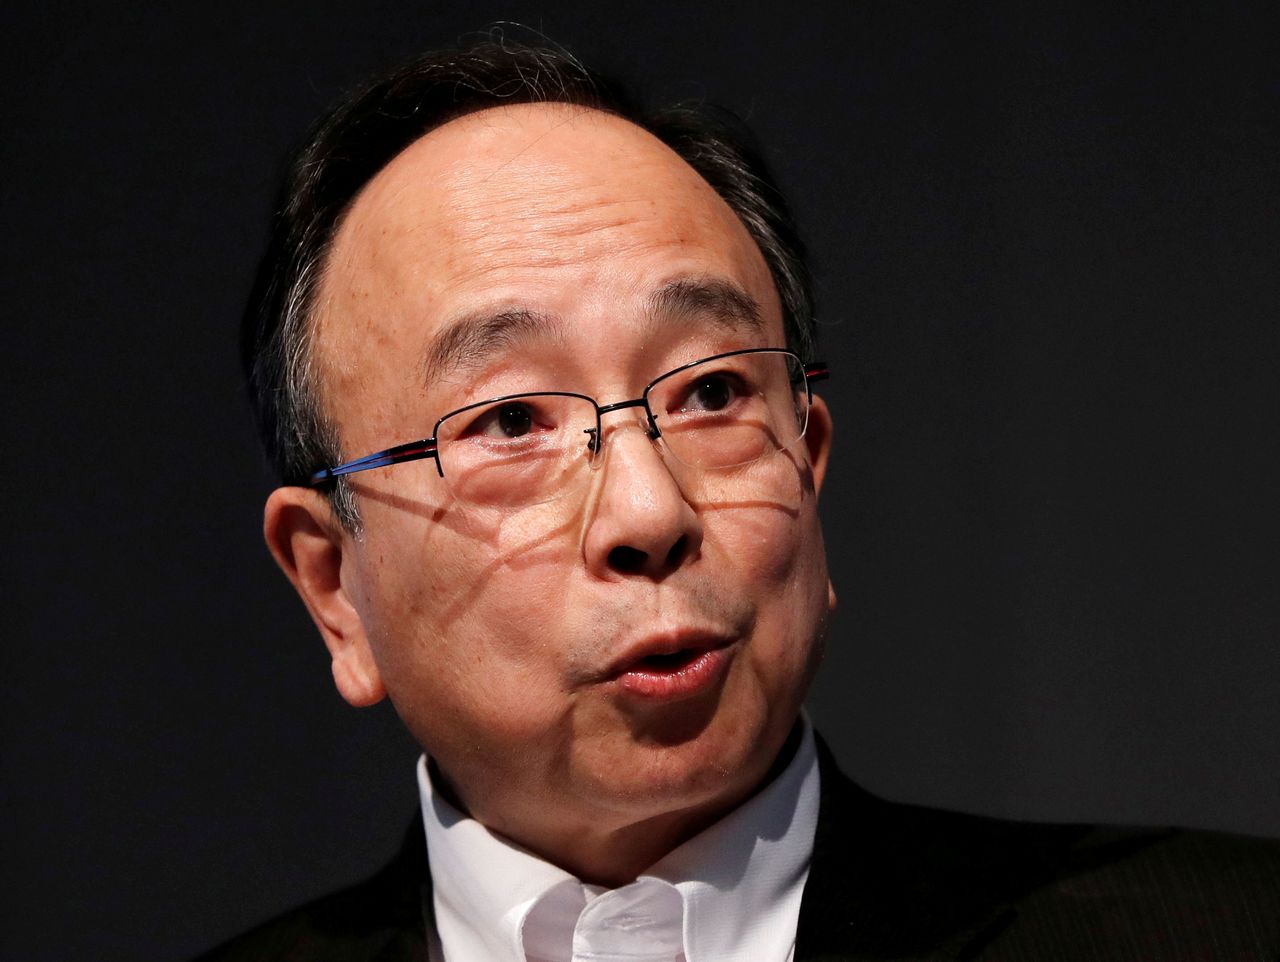 FILE PHOTO: Bank of Japan Deputy Governor Masayoshi Amamiya speaks during a Reuters Newsmaker event in Tokyo, Japan July 5, 2019.     REUTERS/Issei Kato/File Photo